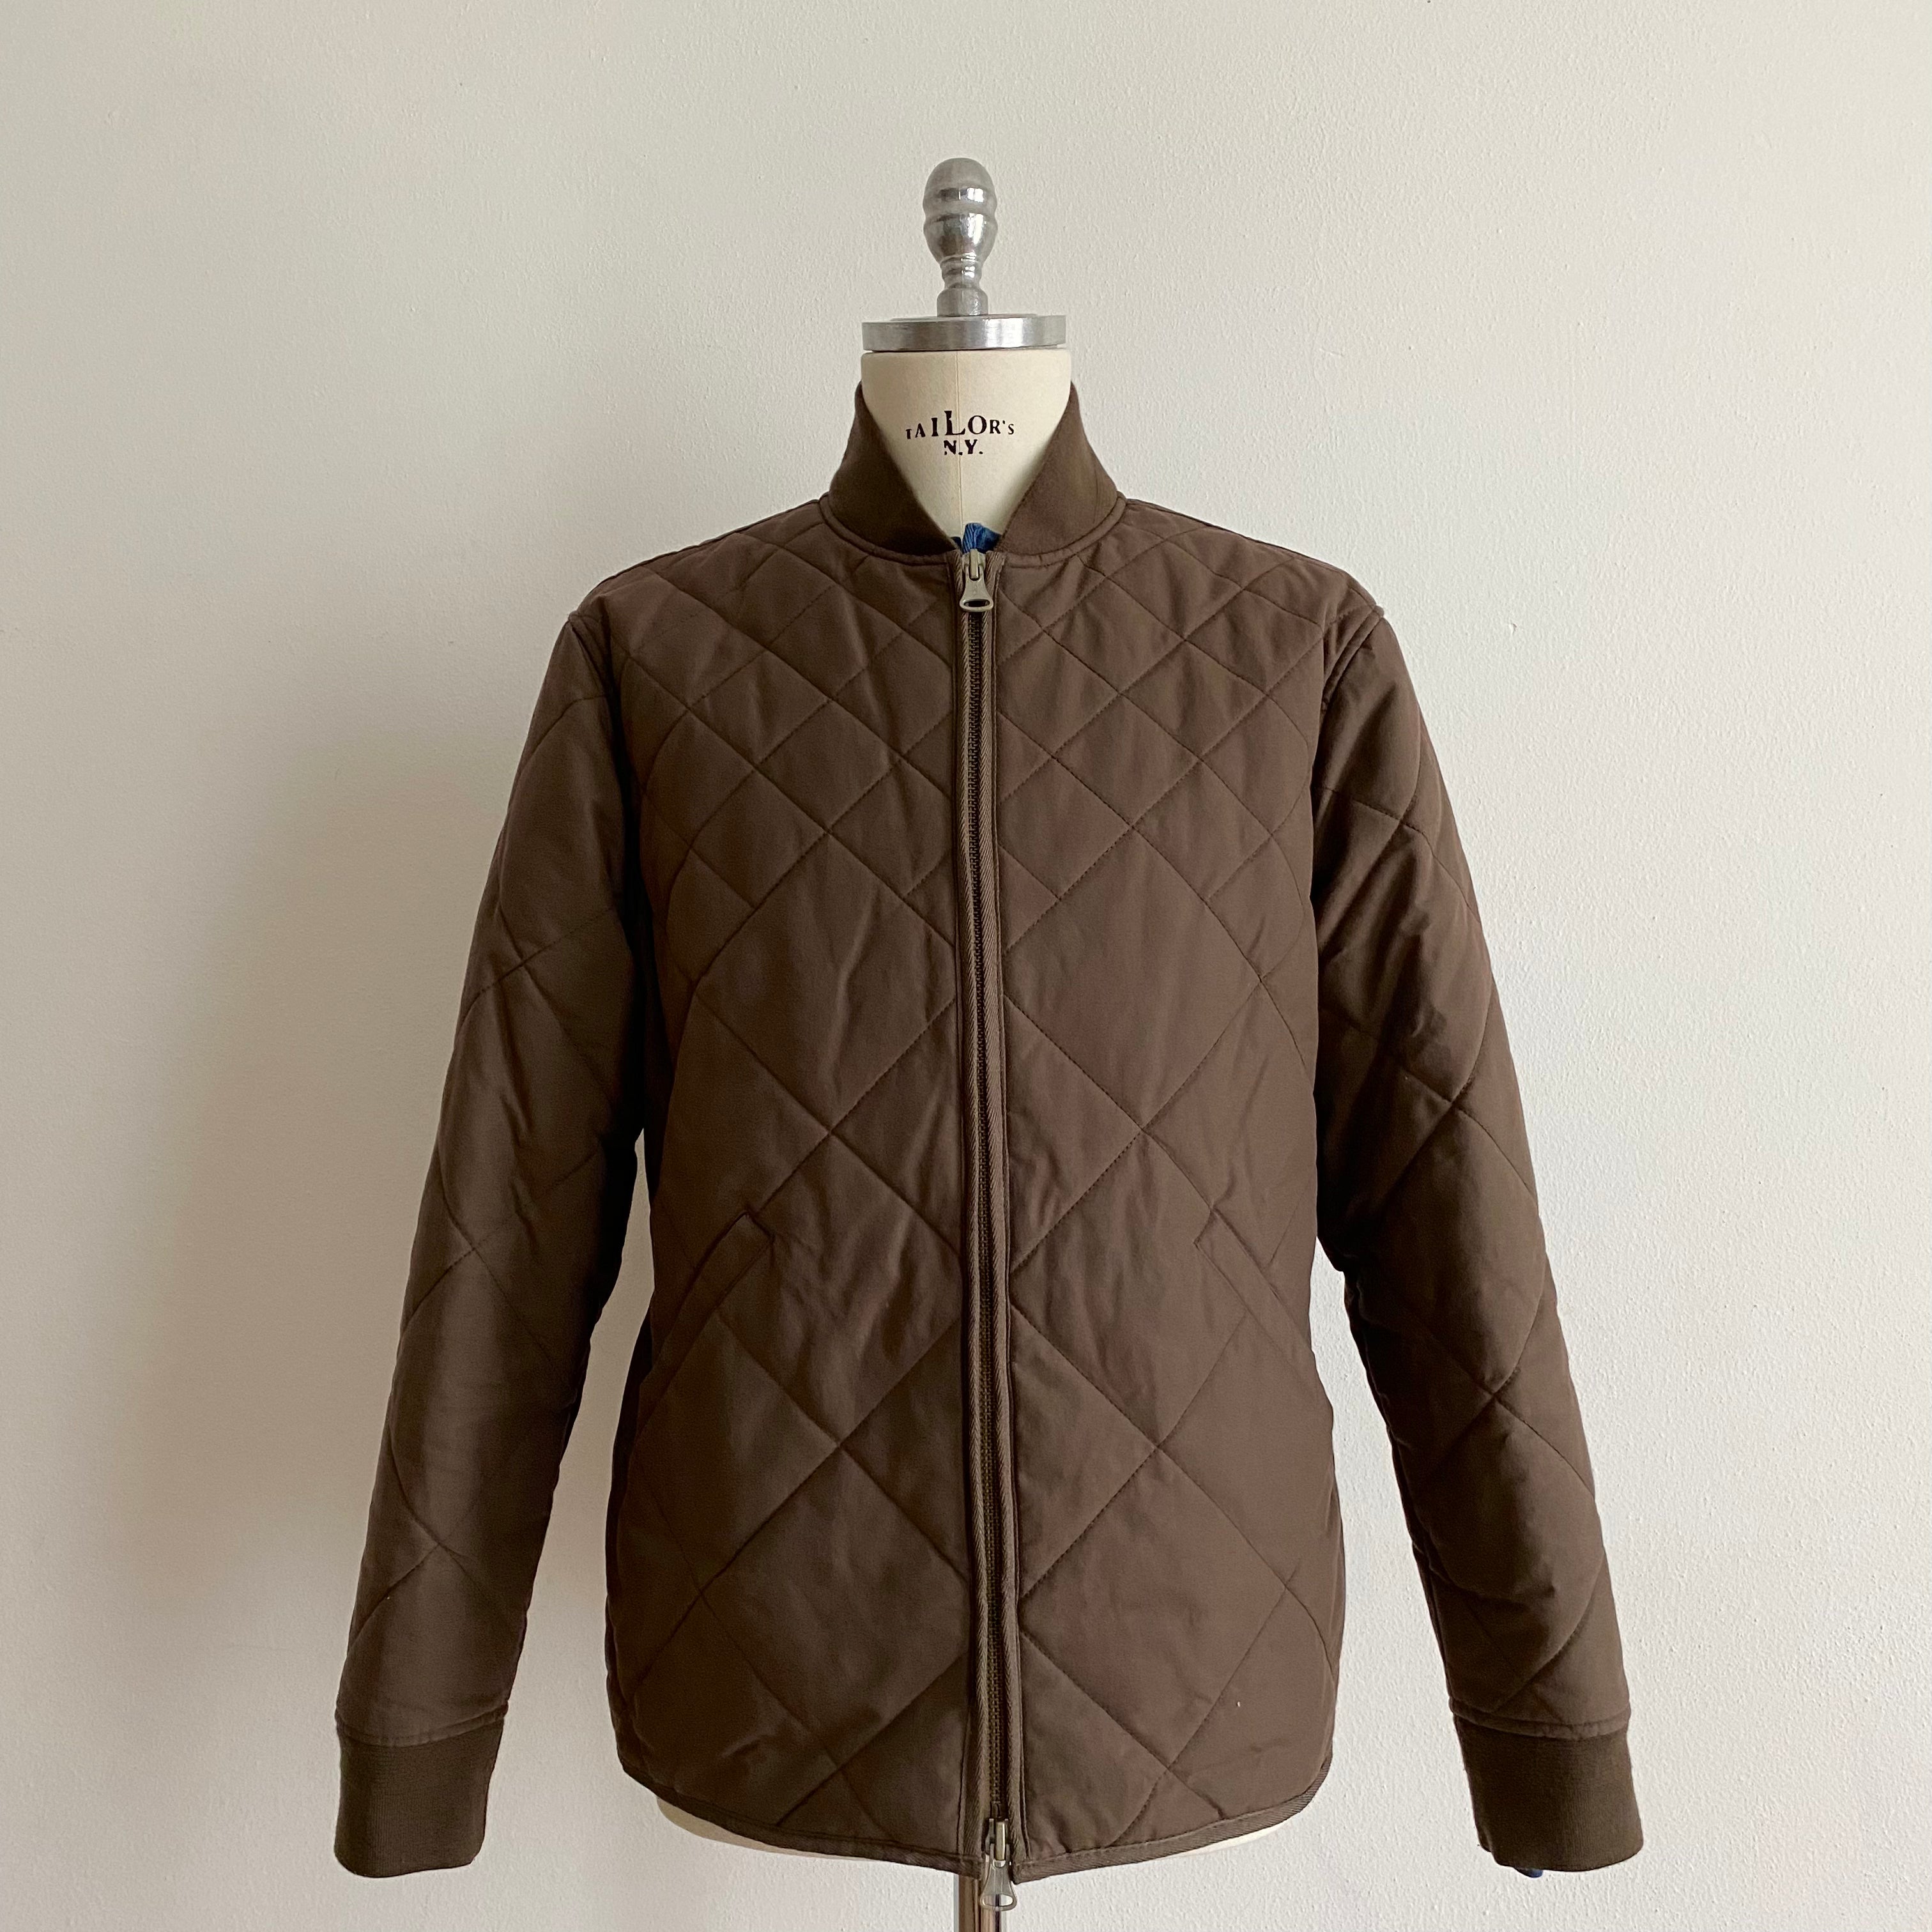 The Quilted Bomber Jacket in Espresso - L/42